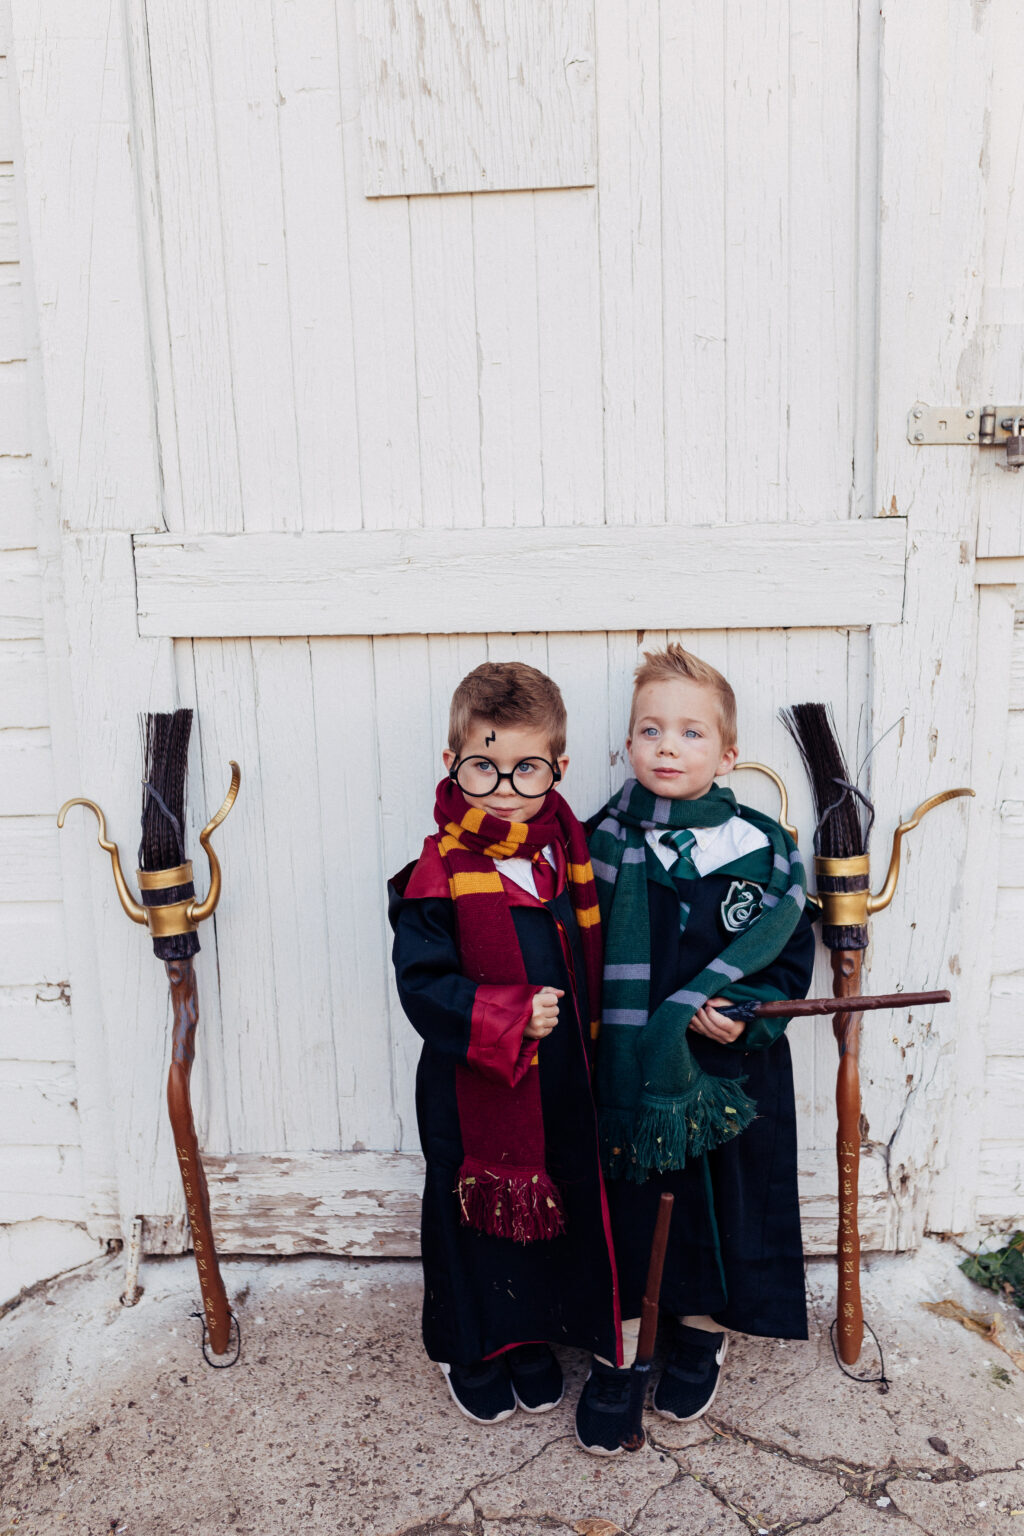 Harry Potter Family Costumes - Perfect for Halloween! - Twist Me Pretty